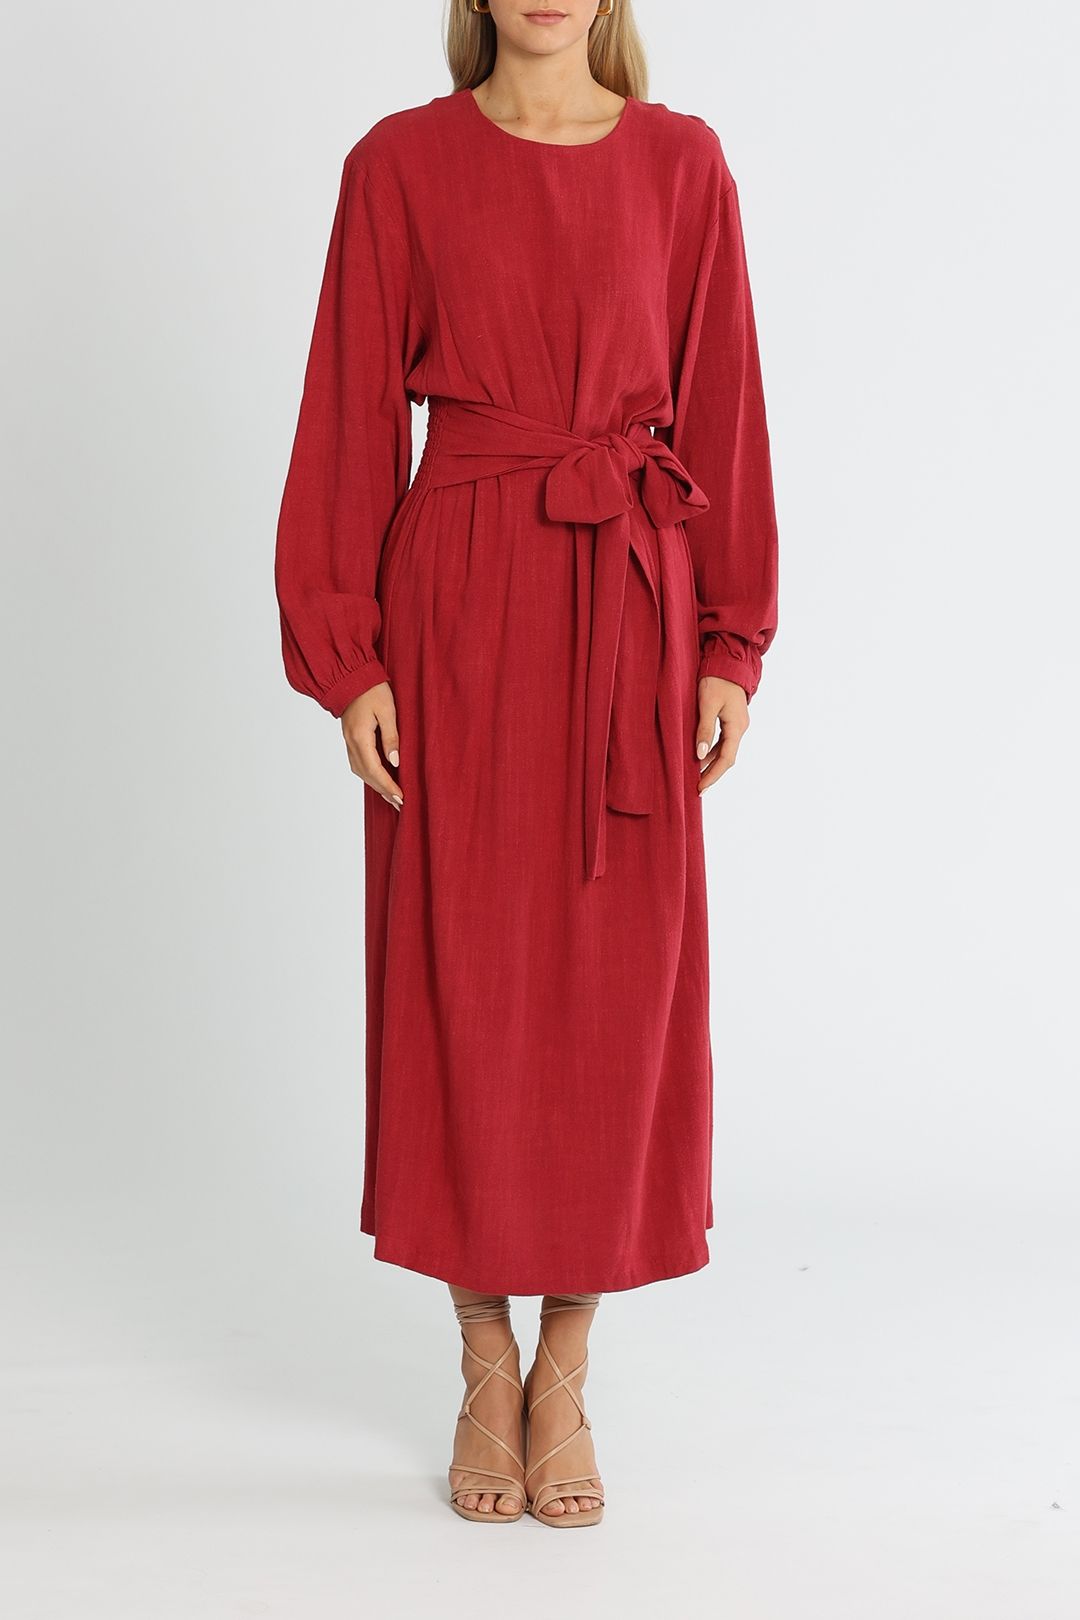 Brave and True Turning Point Dress Berry Linen Viscose